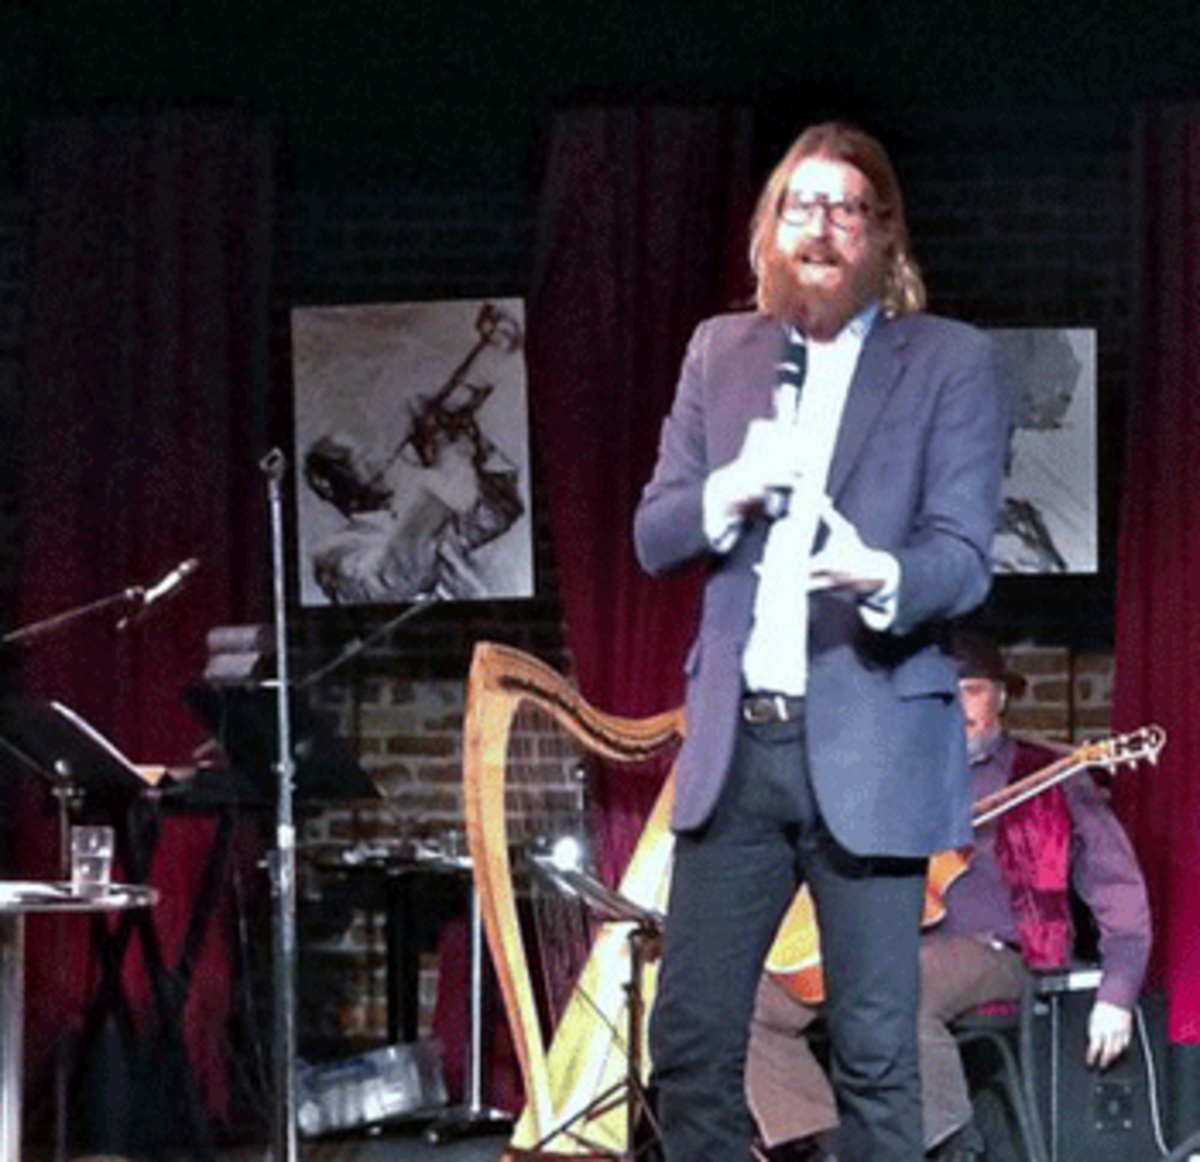 Sanderson Jones, the stand-up comedian who started a global atheist movement called Sunday Assembly, talks to the crowd at the group's first event in San Jose at Theater on San Pedro Square, Nov. 11, 2013. (Sal Pizarro)